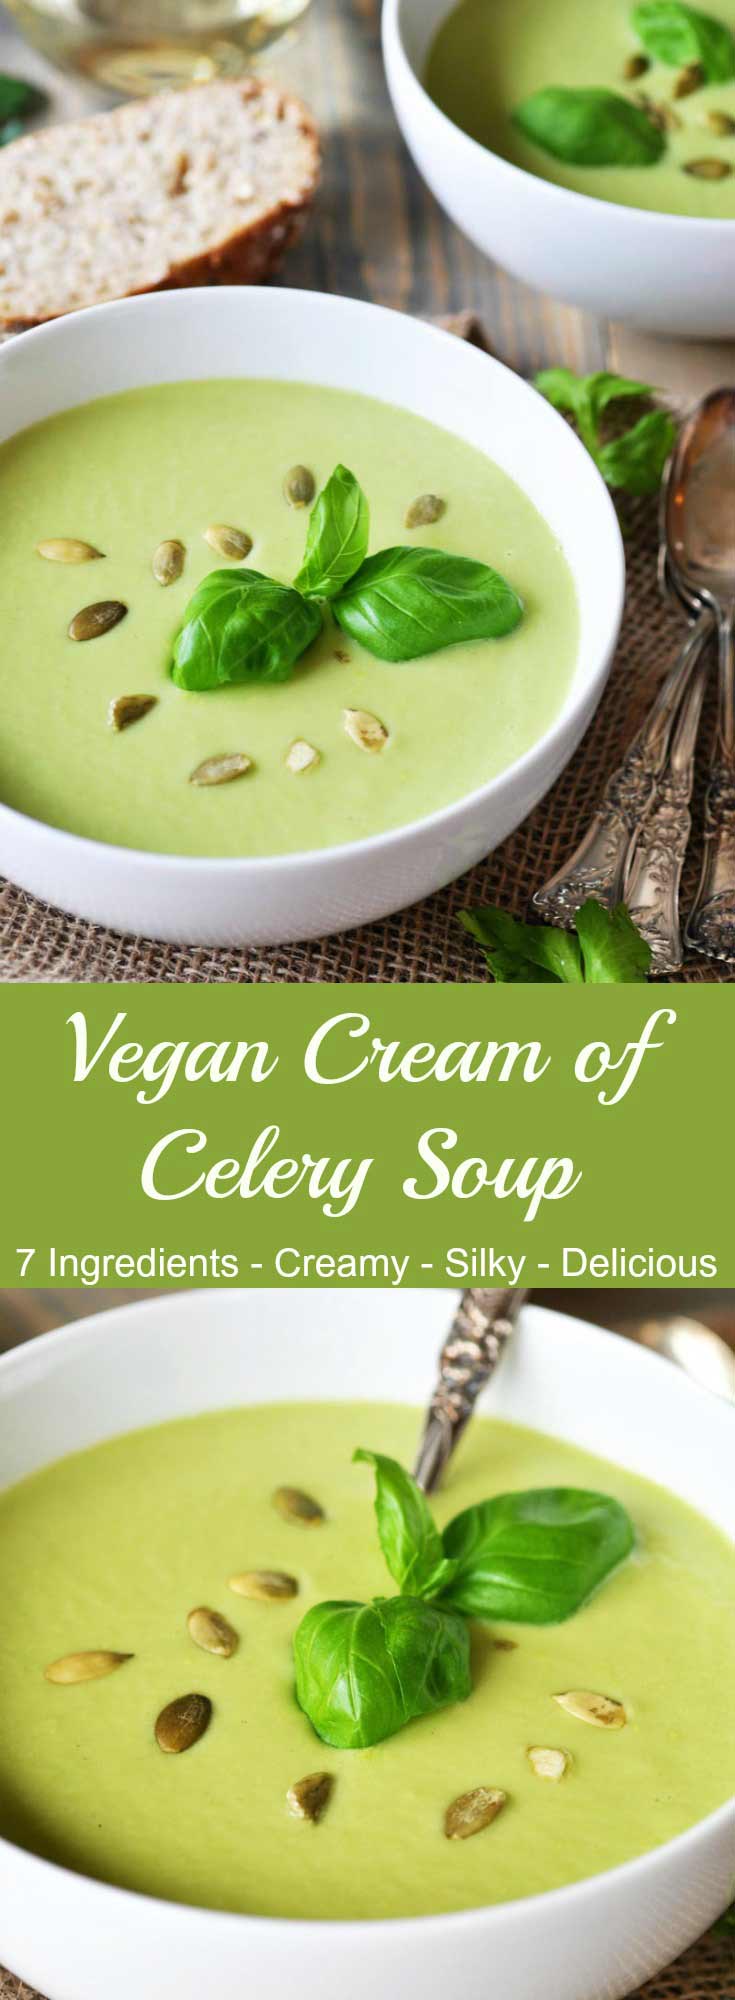 Vegan Cream of Celery Soup! A simple, easy, and delicious soup recipe made with celery, basil, and lemon. www.veganosity.com